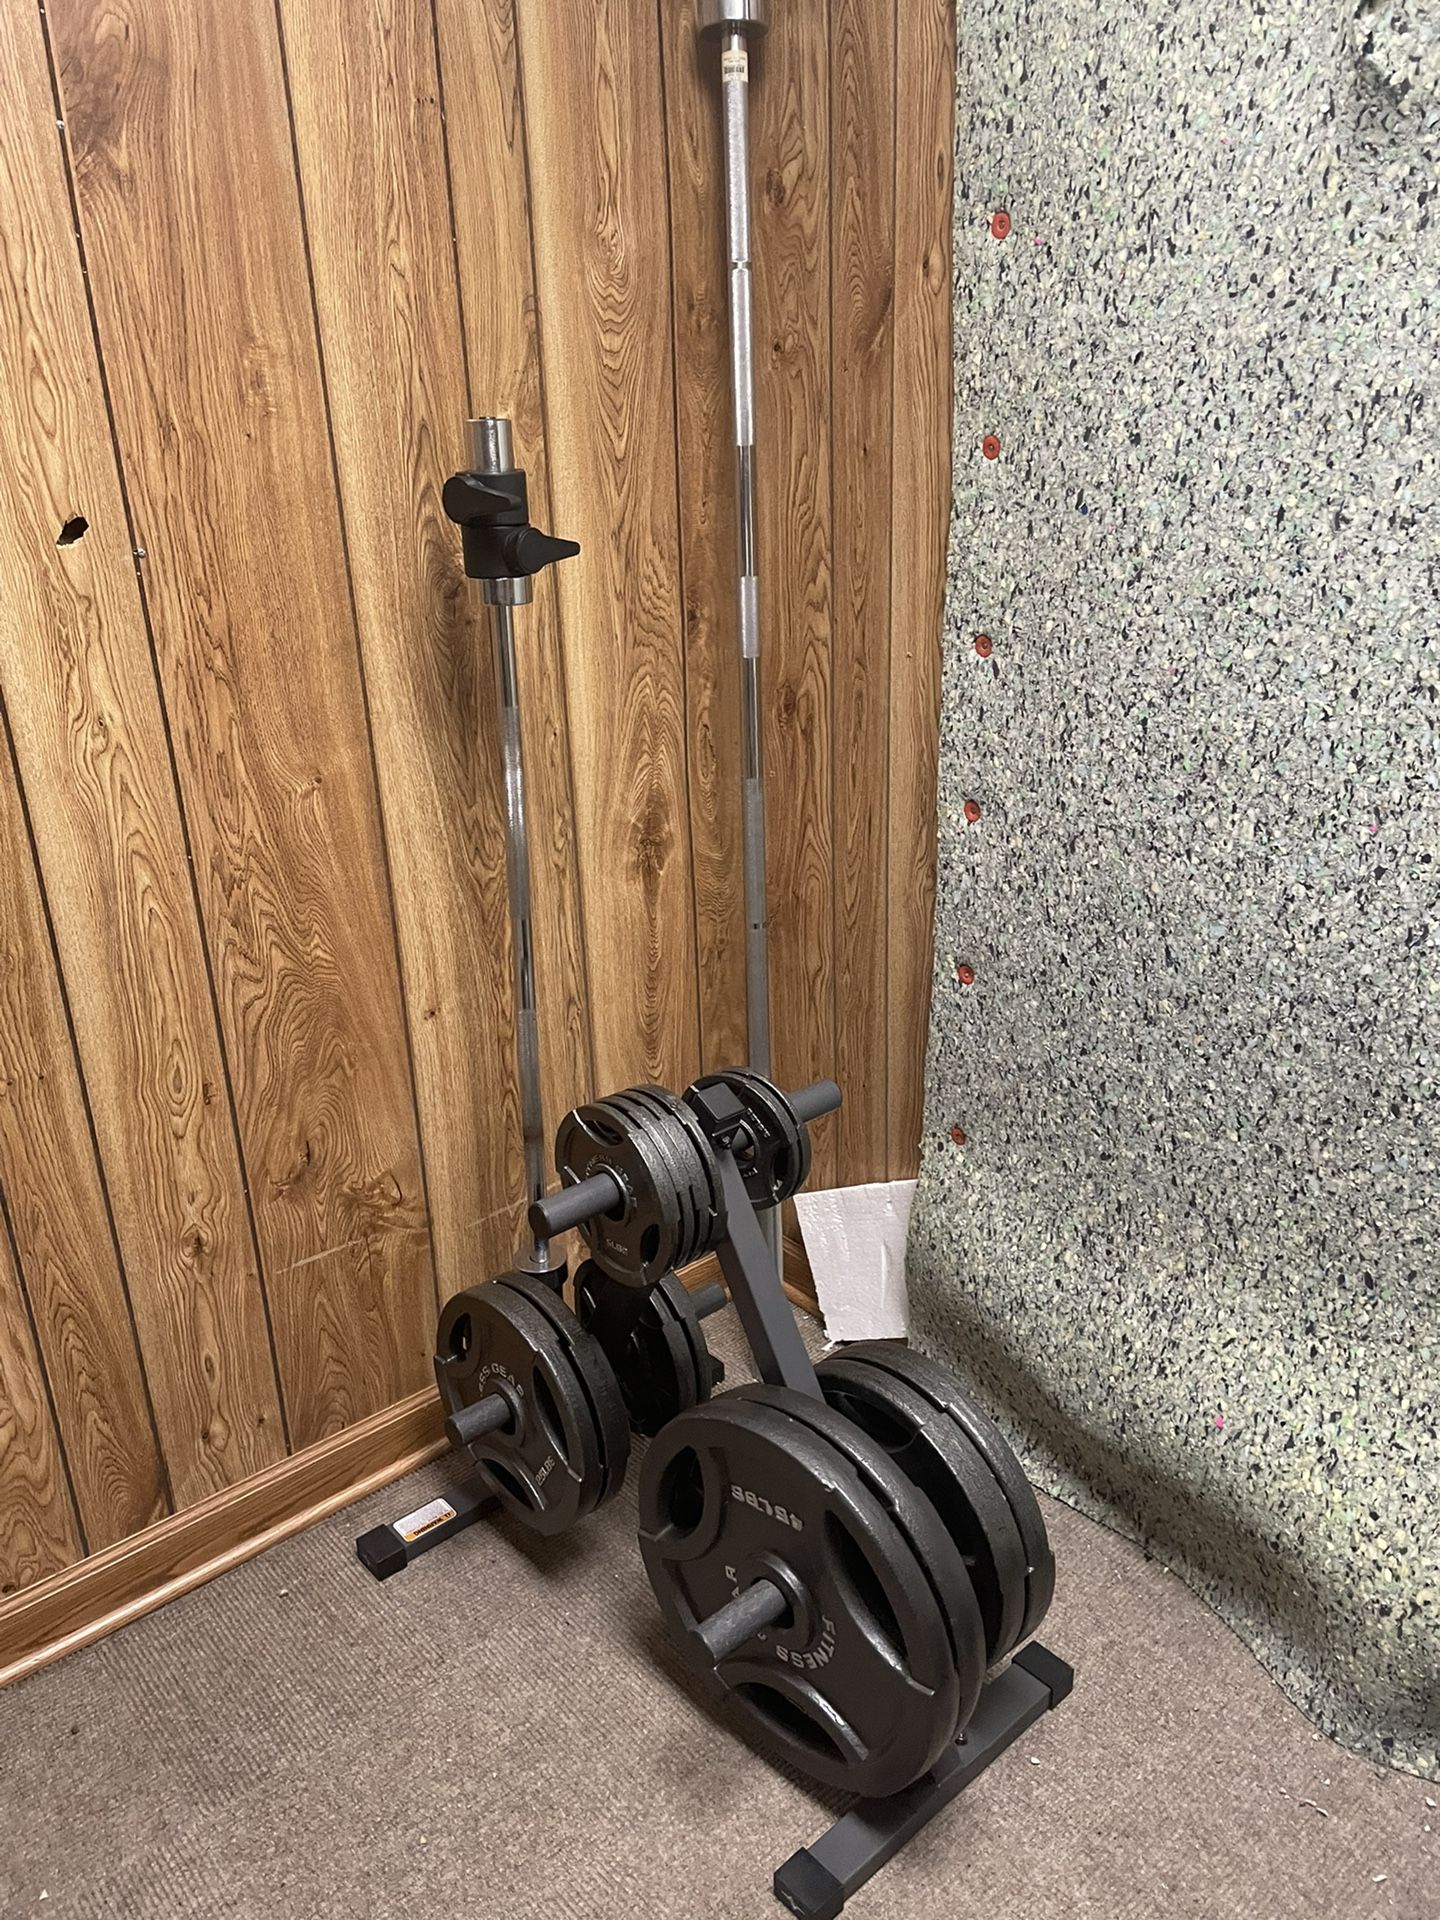 olympic weight set, barbell, weight tree